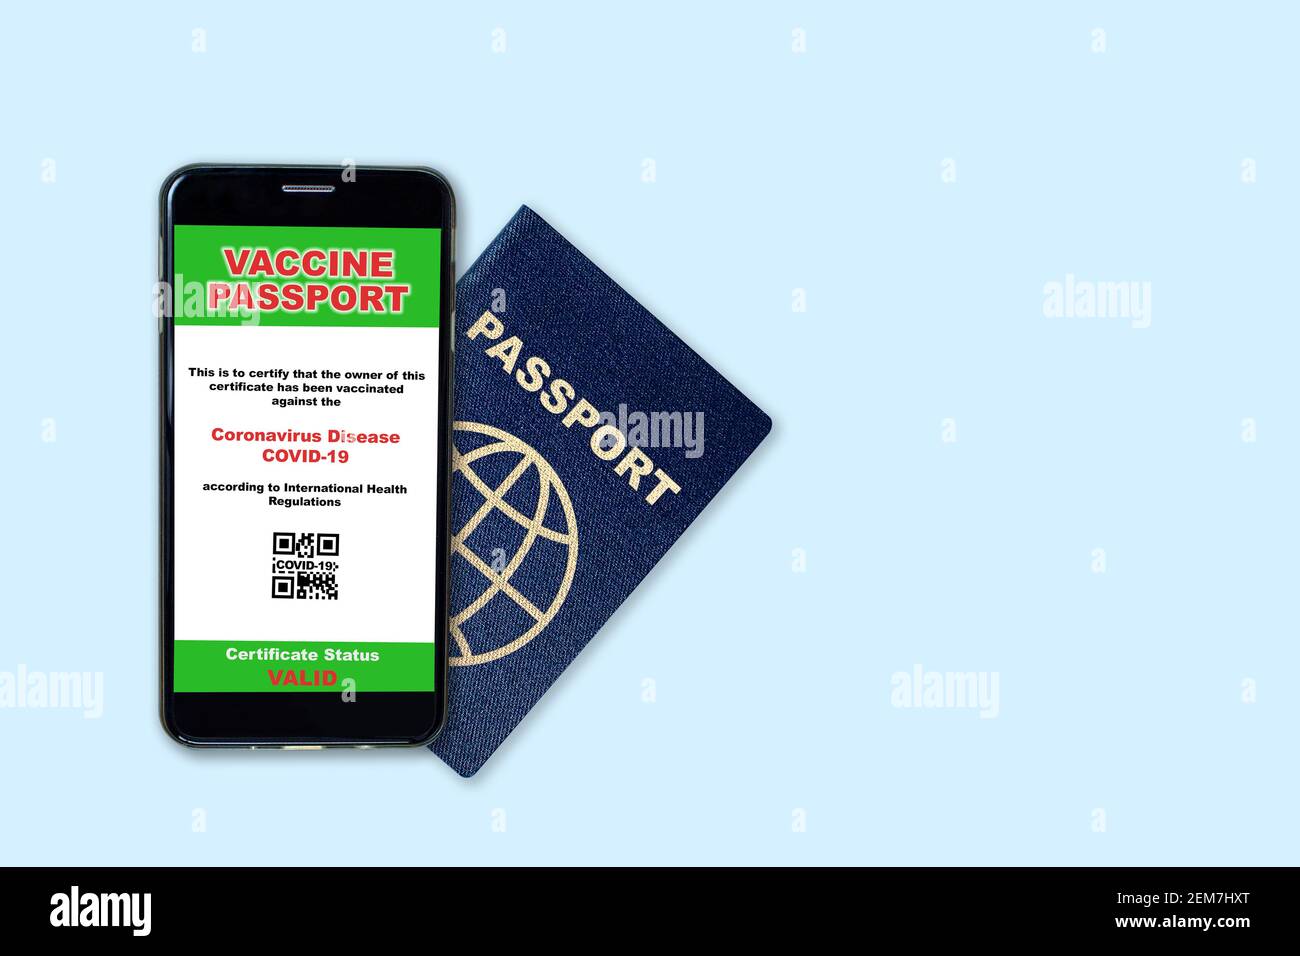 Smartphone on travel passport showing digital certificate of COVID-19 vaccination. Concept of vaccine passport in the new normal future air or land tr Stock Photo